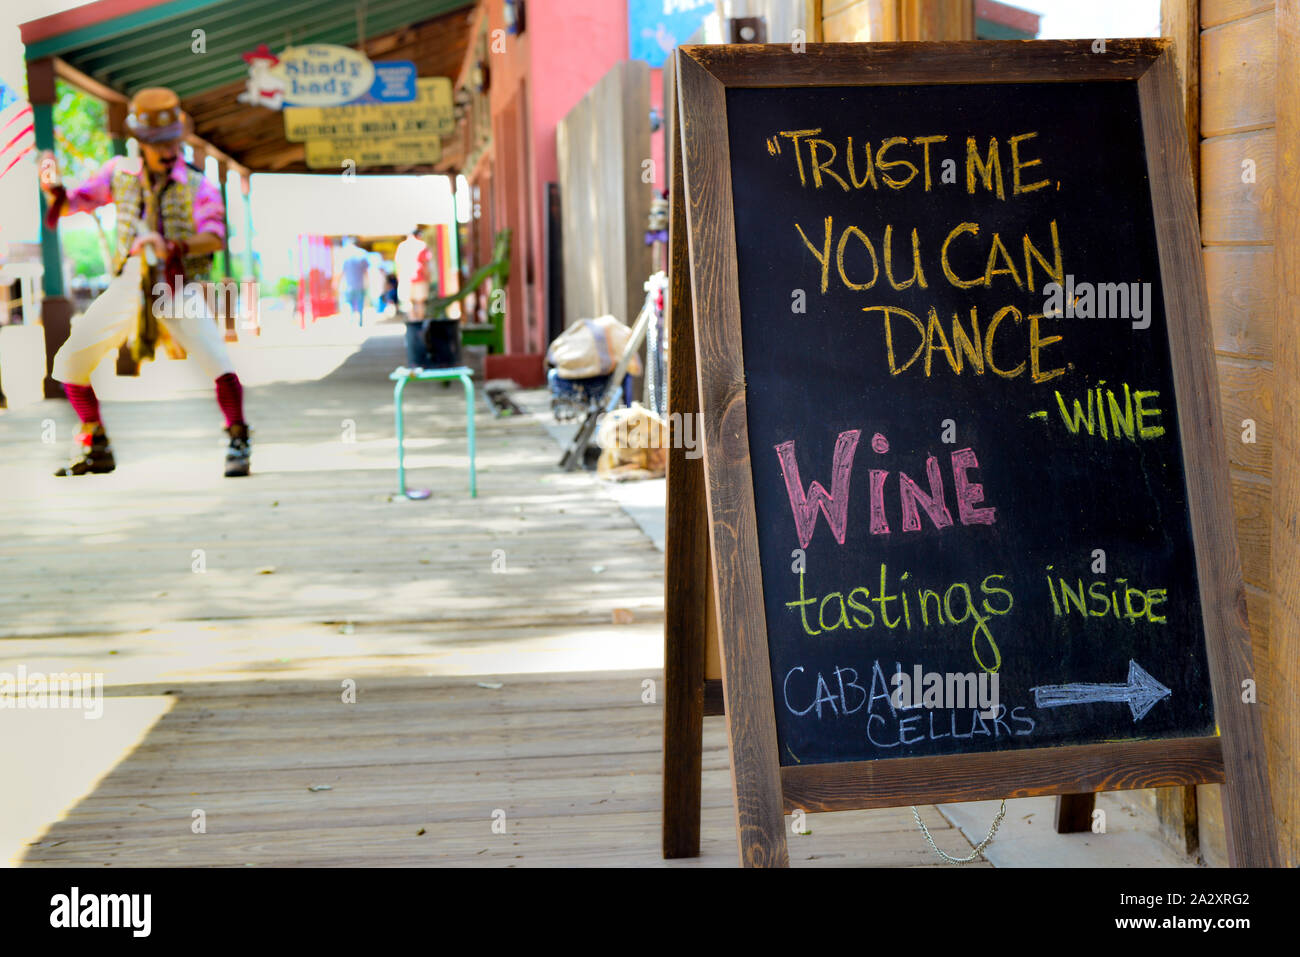 Sandwich board sign promoting wine merchant has funny quote while street dancing performer nearby on the wooden sidewalks of legendary Tombstone, AZ, Stock Photo